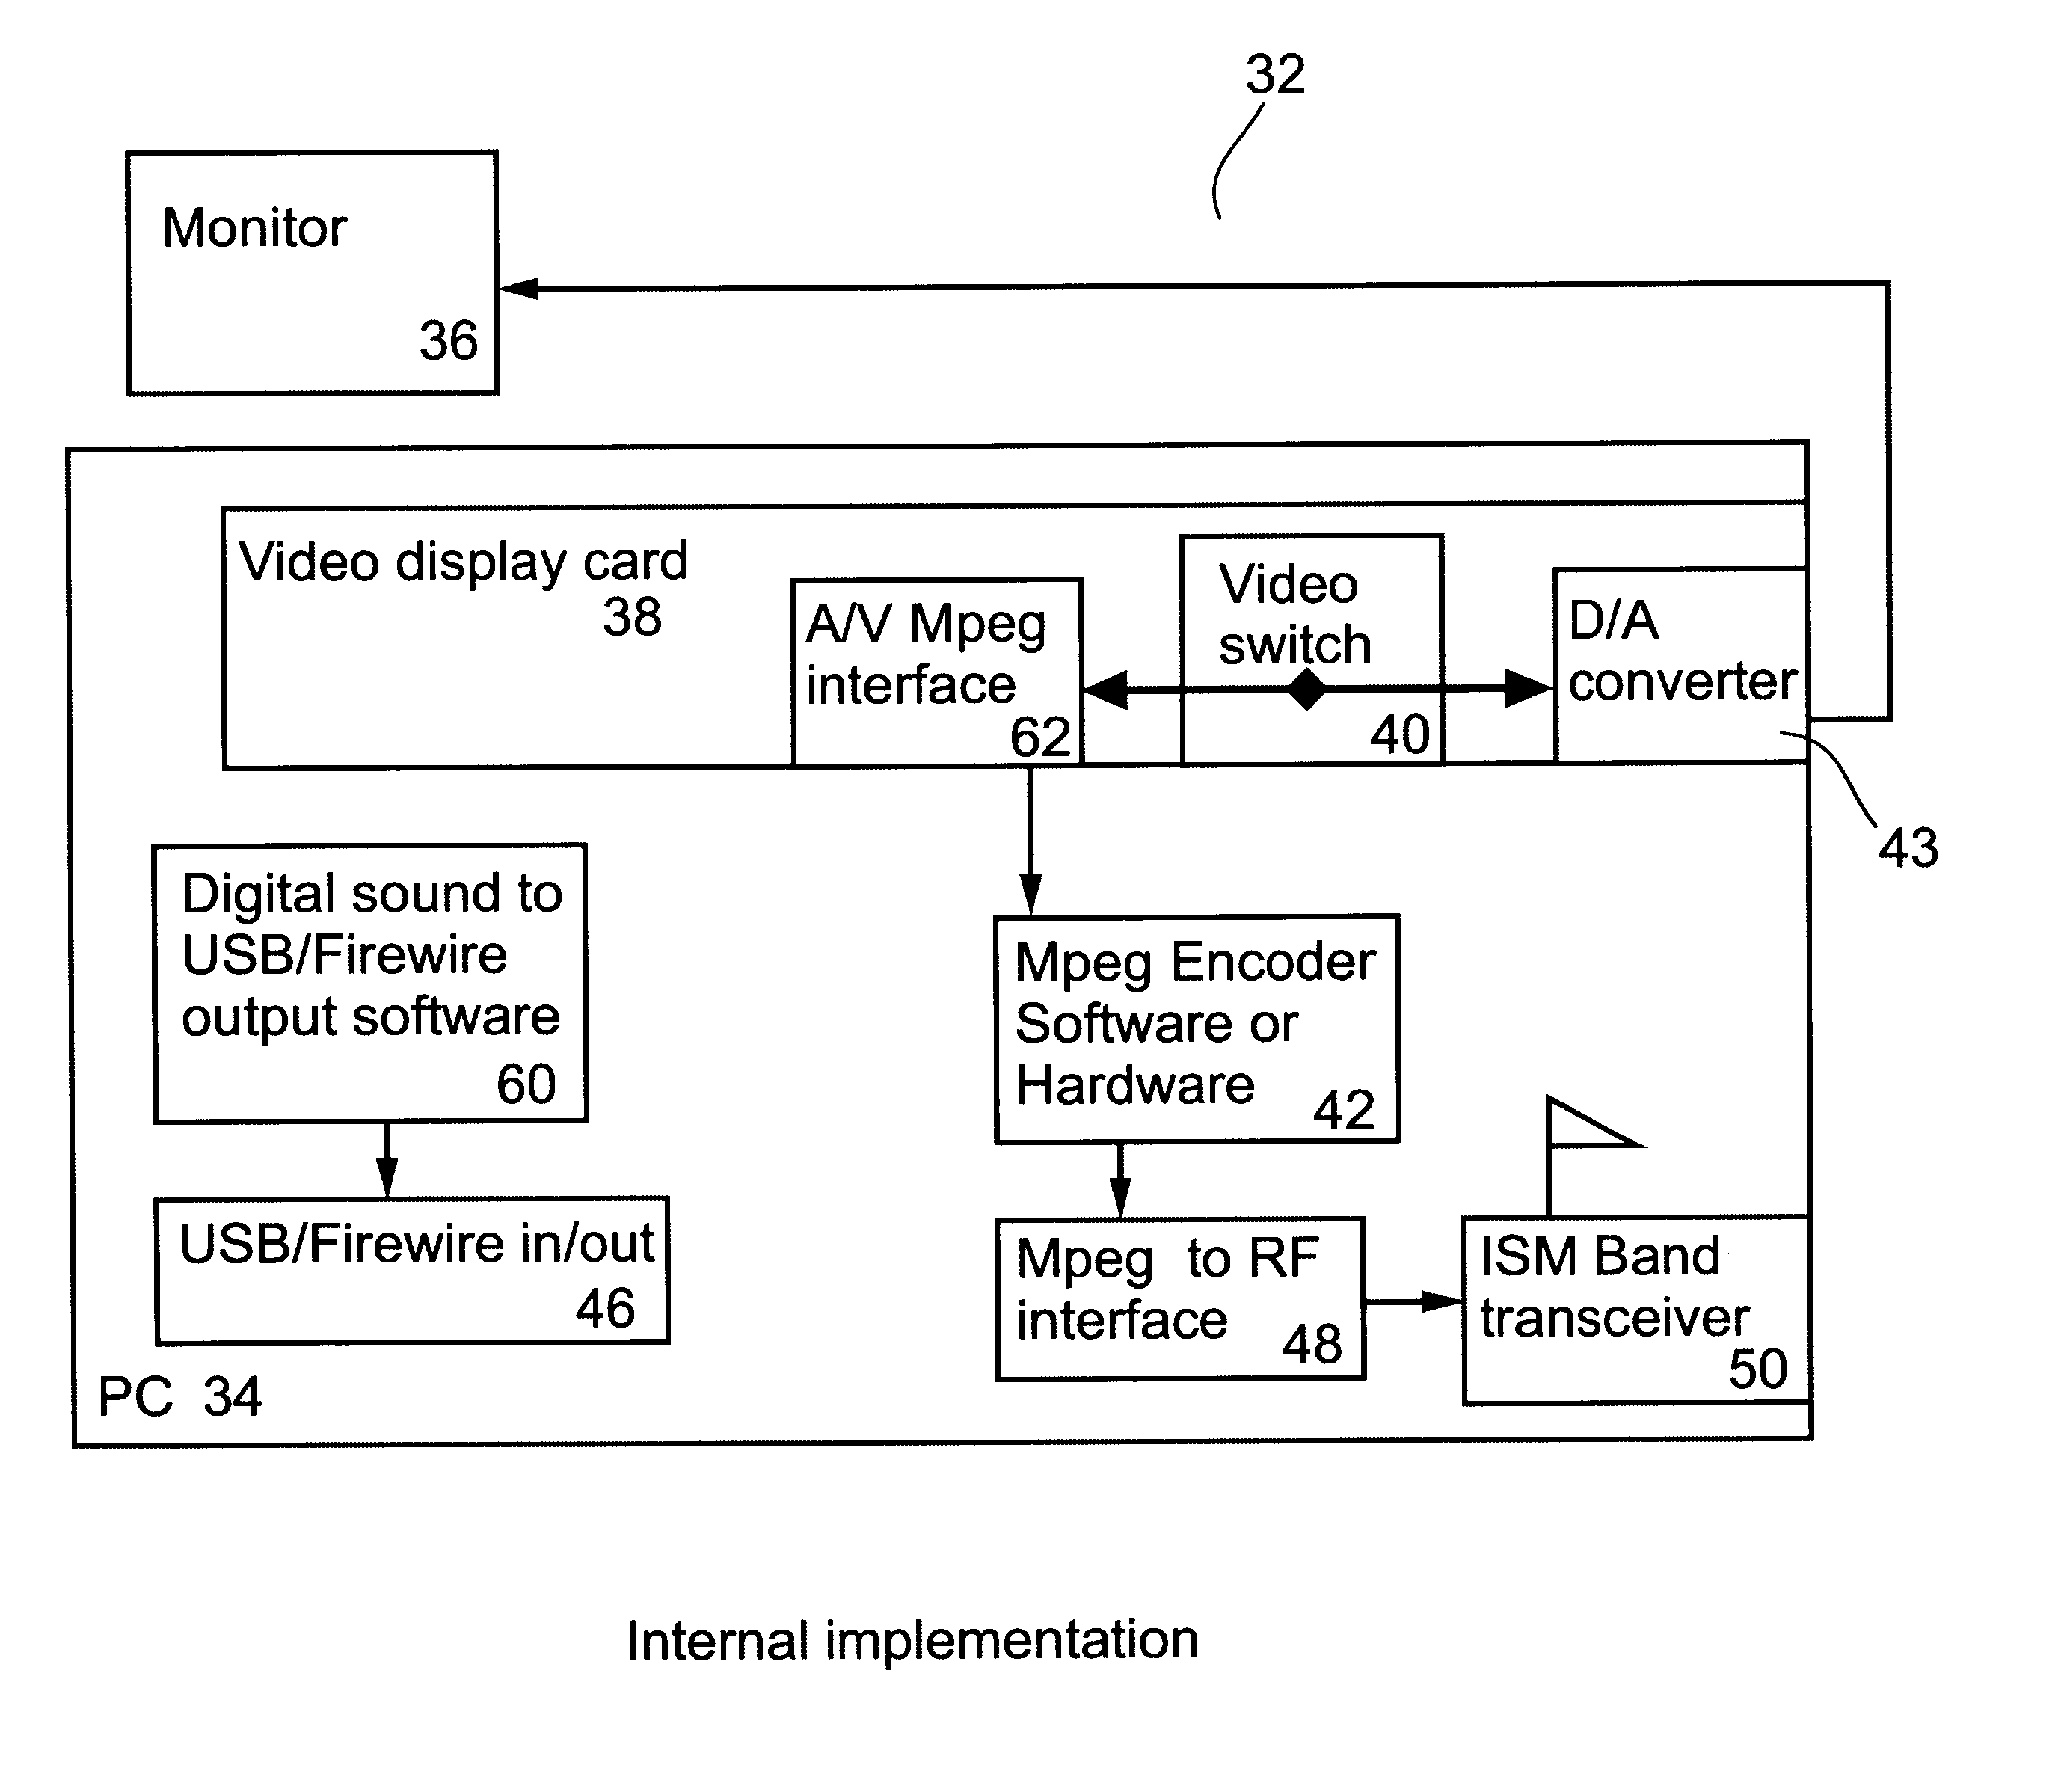 Method for enhancing video compression through automatic data analysis and profile selection